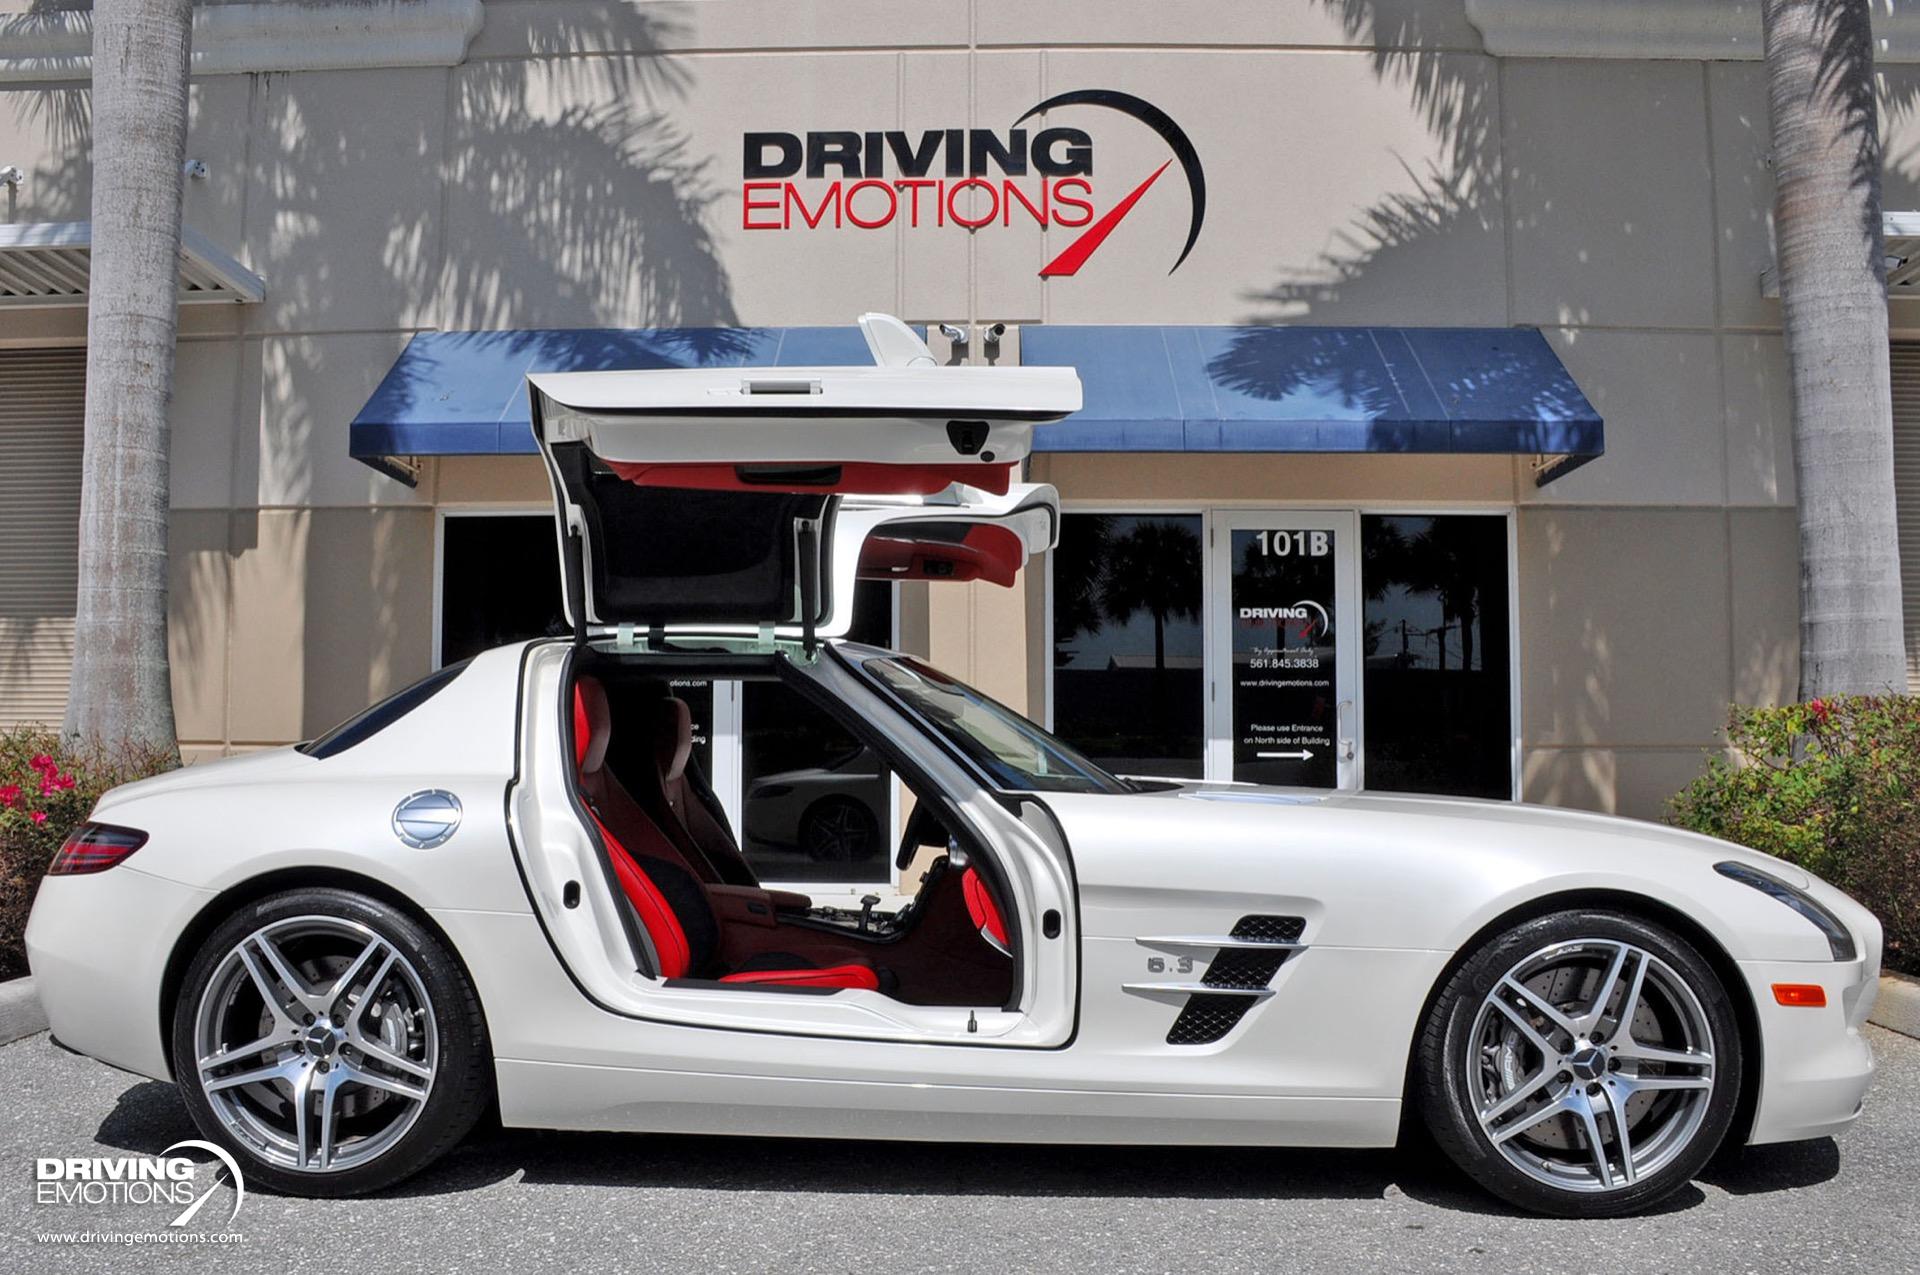 Used 2011 Mercedes-Benz SLS AMG GULLWING! DESIGNO MYSTIC WHITE/RED! CARBON!! COLLECTOR!! | Lake Park, FL